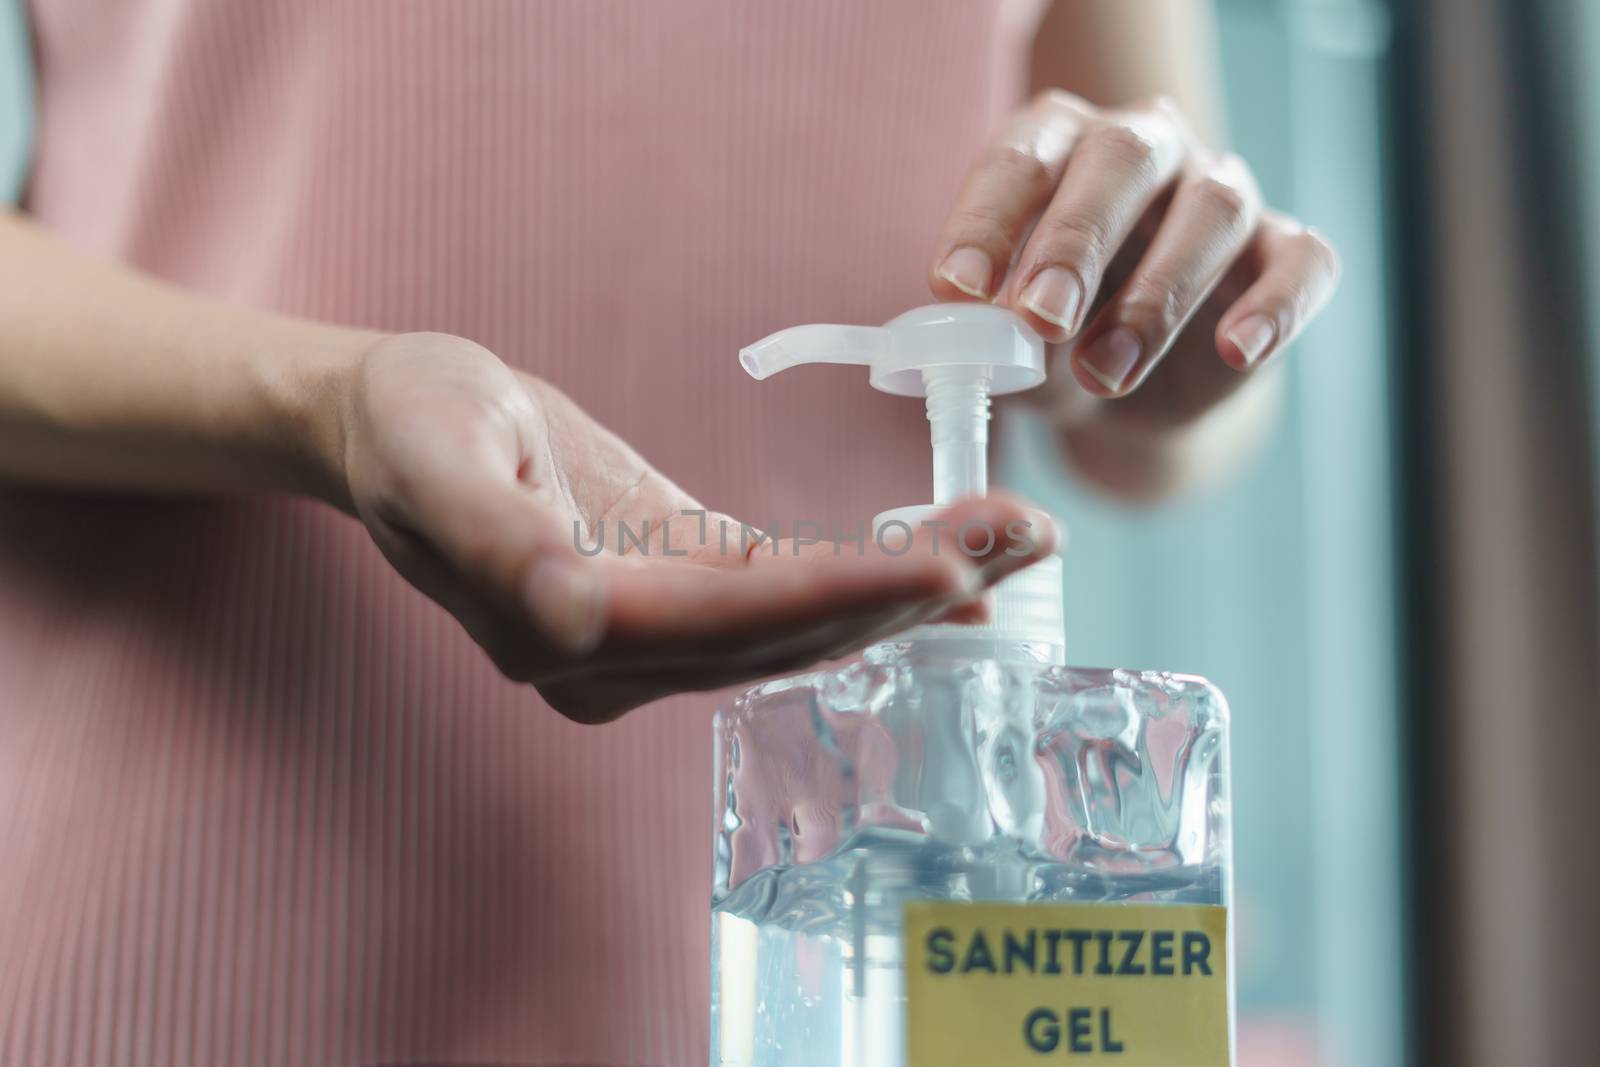 Hand wash with disinfectant gel dispenser during the epidemic covid-19.